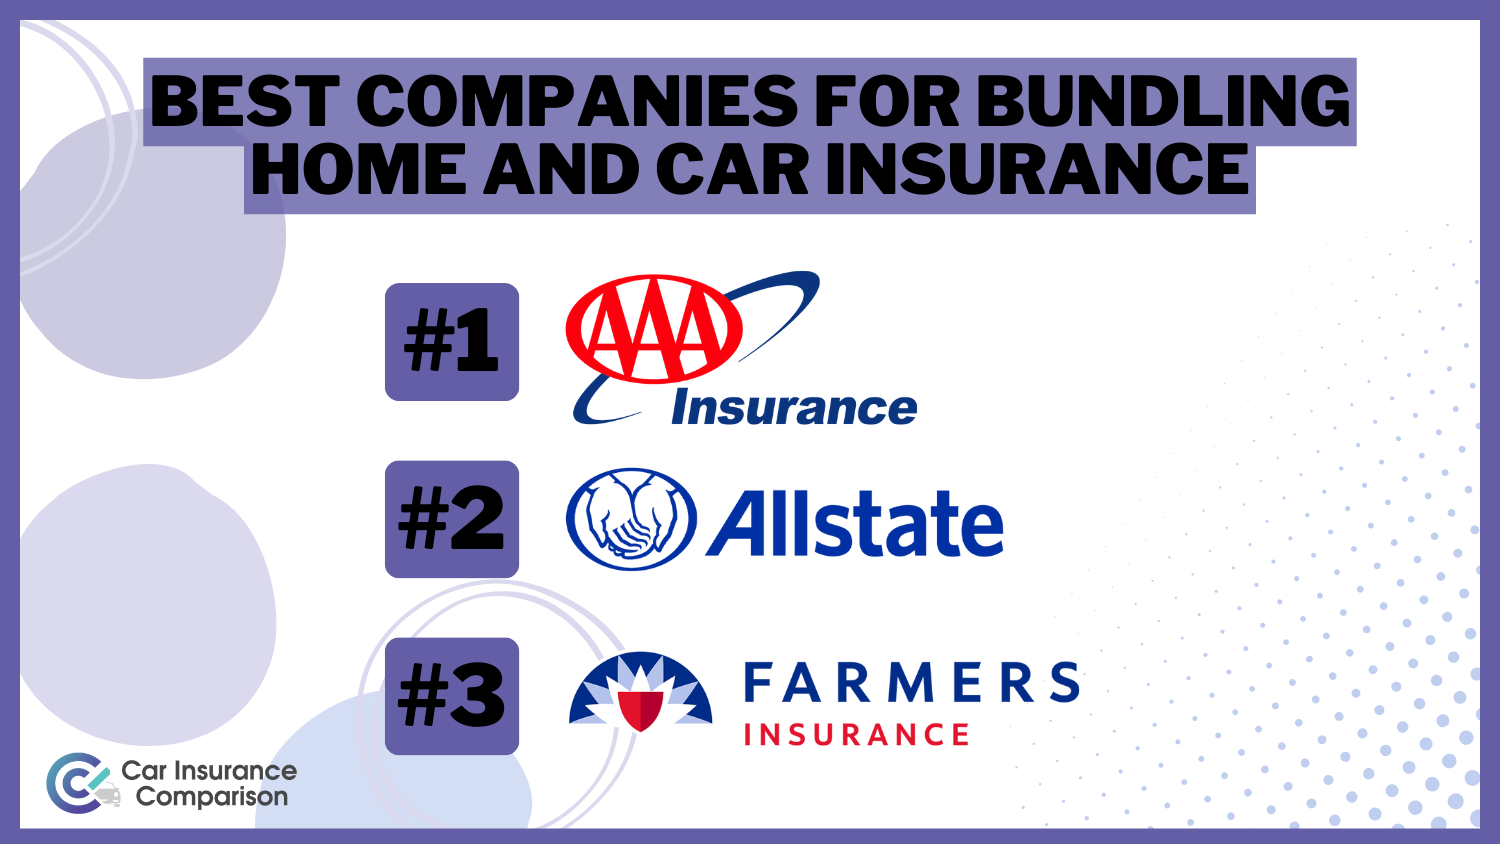 10 Best Companies for Bundling Home and Car Insurance: AAA, Allstate, and Farmers